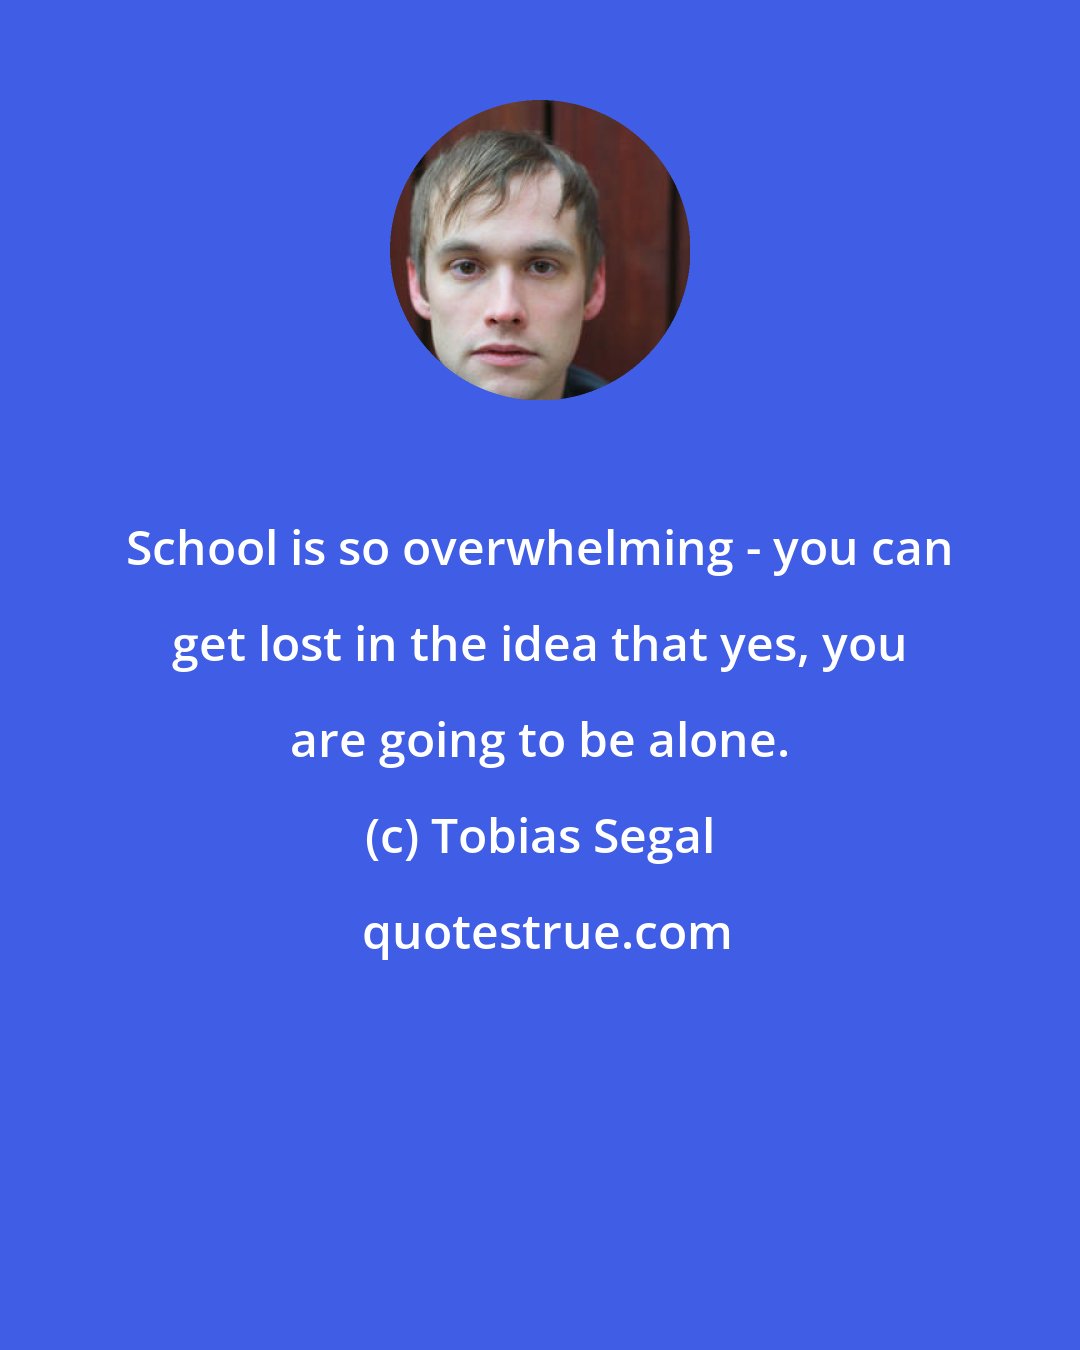 Tobias Segal: School is so overwhelming - you can get lost in the idea that yes, you are going to be alone.